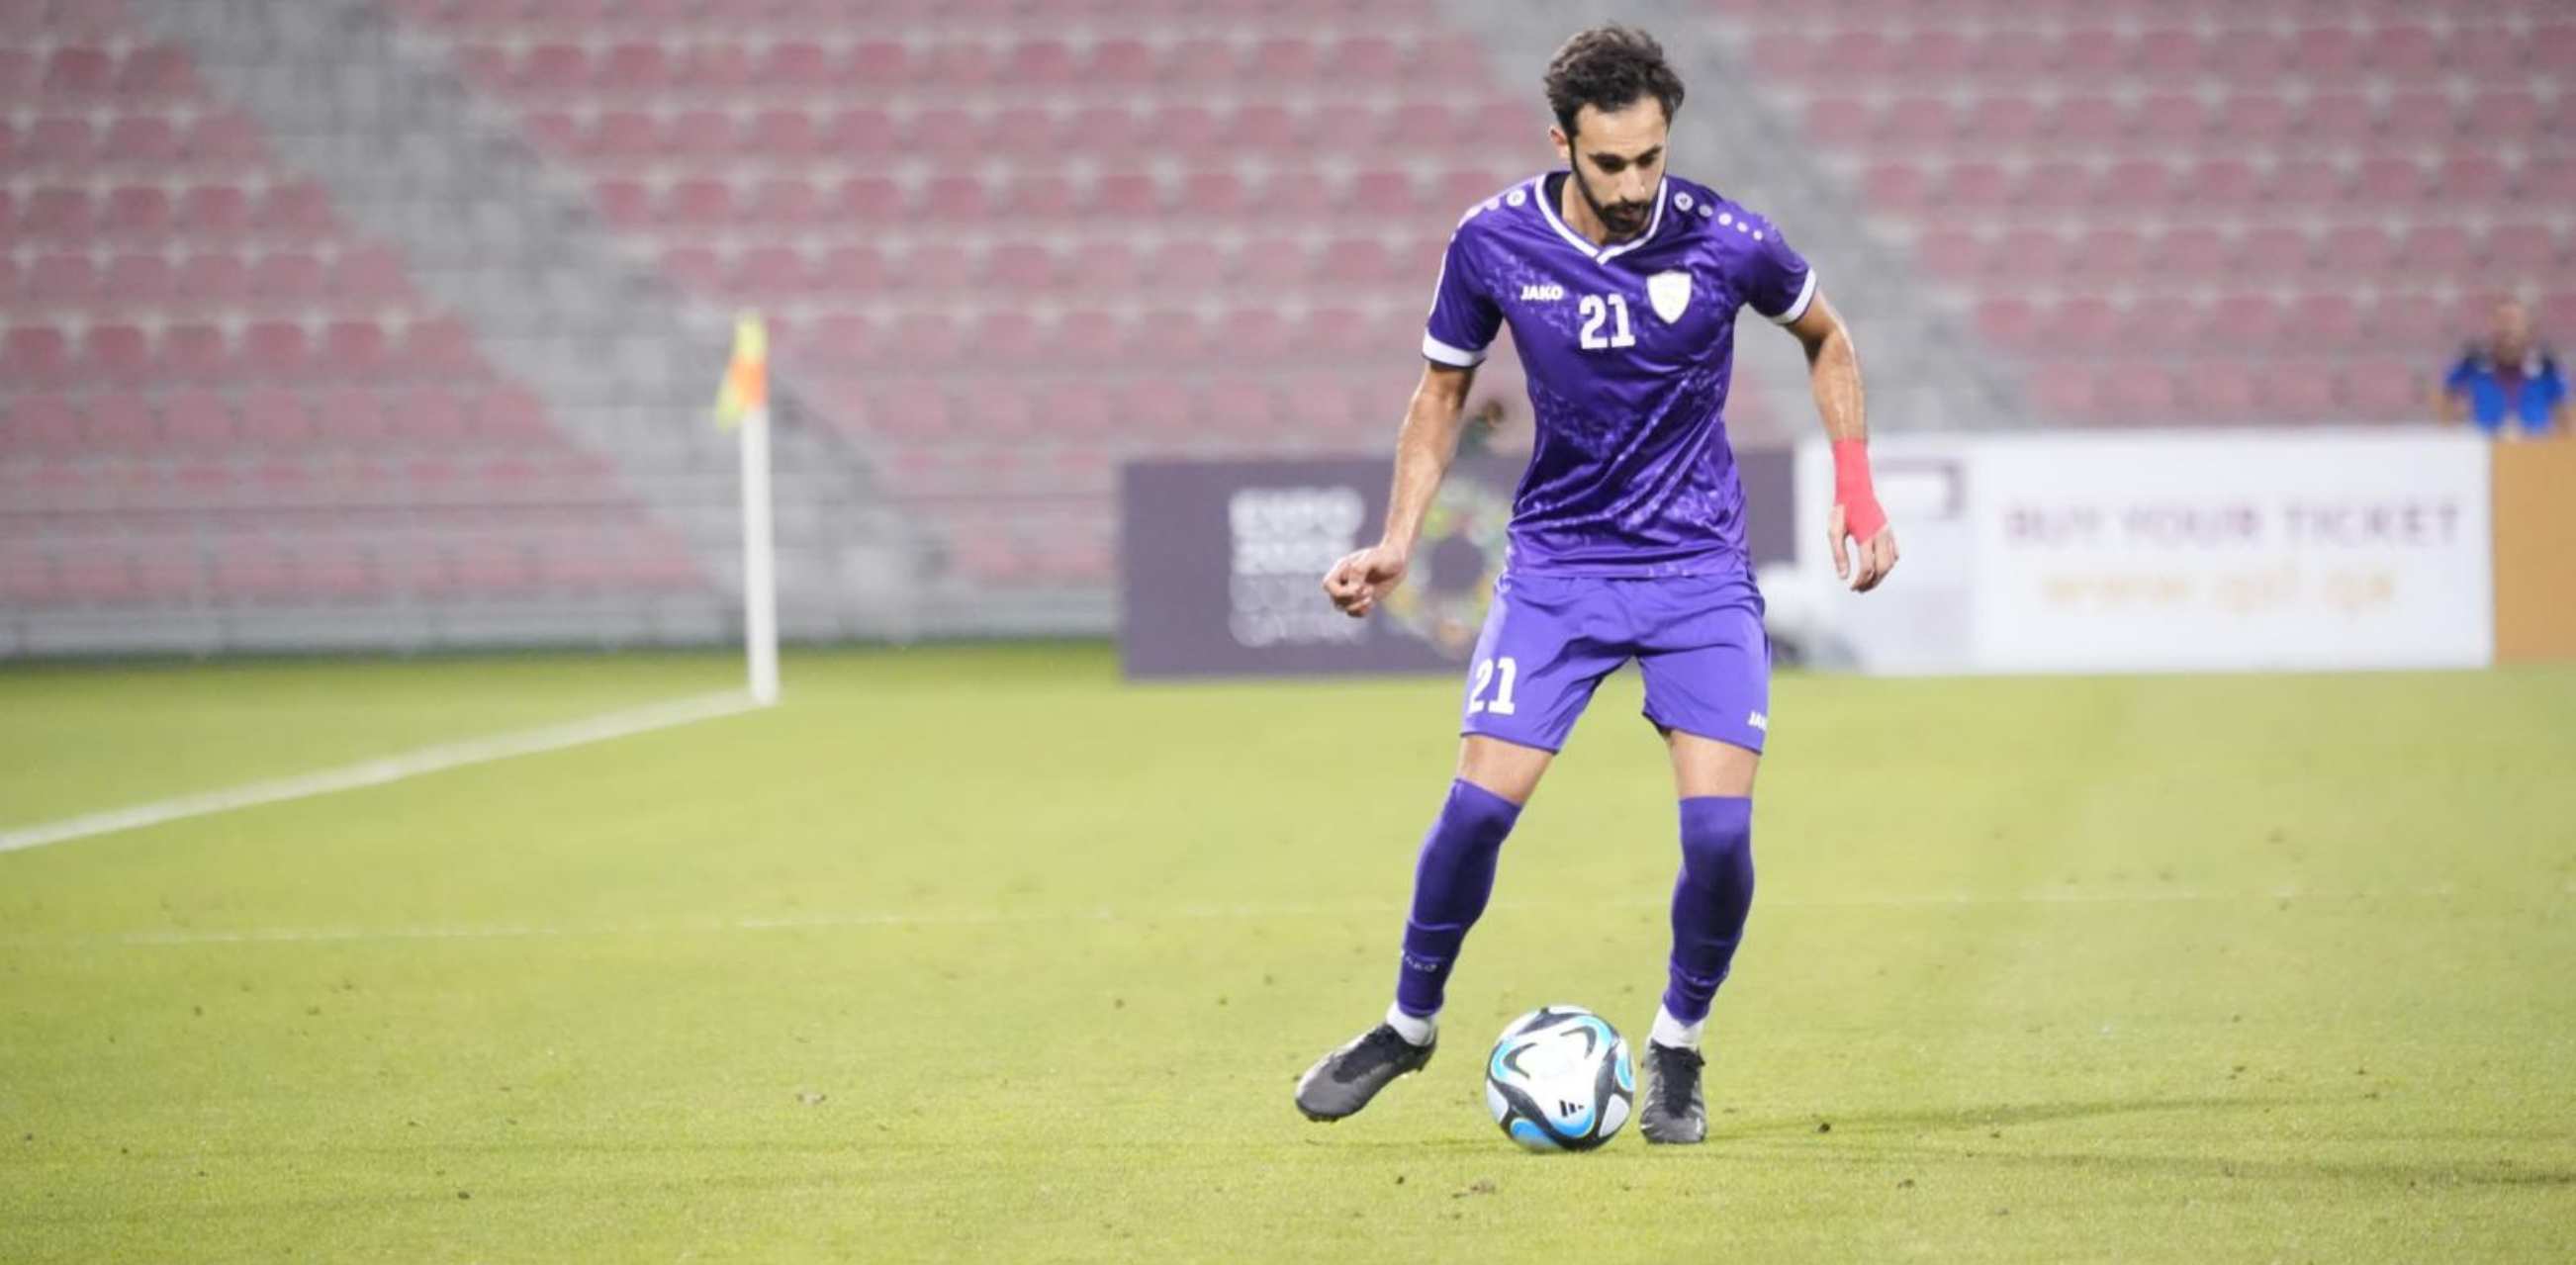 Another loss for our team against Al-Duhail